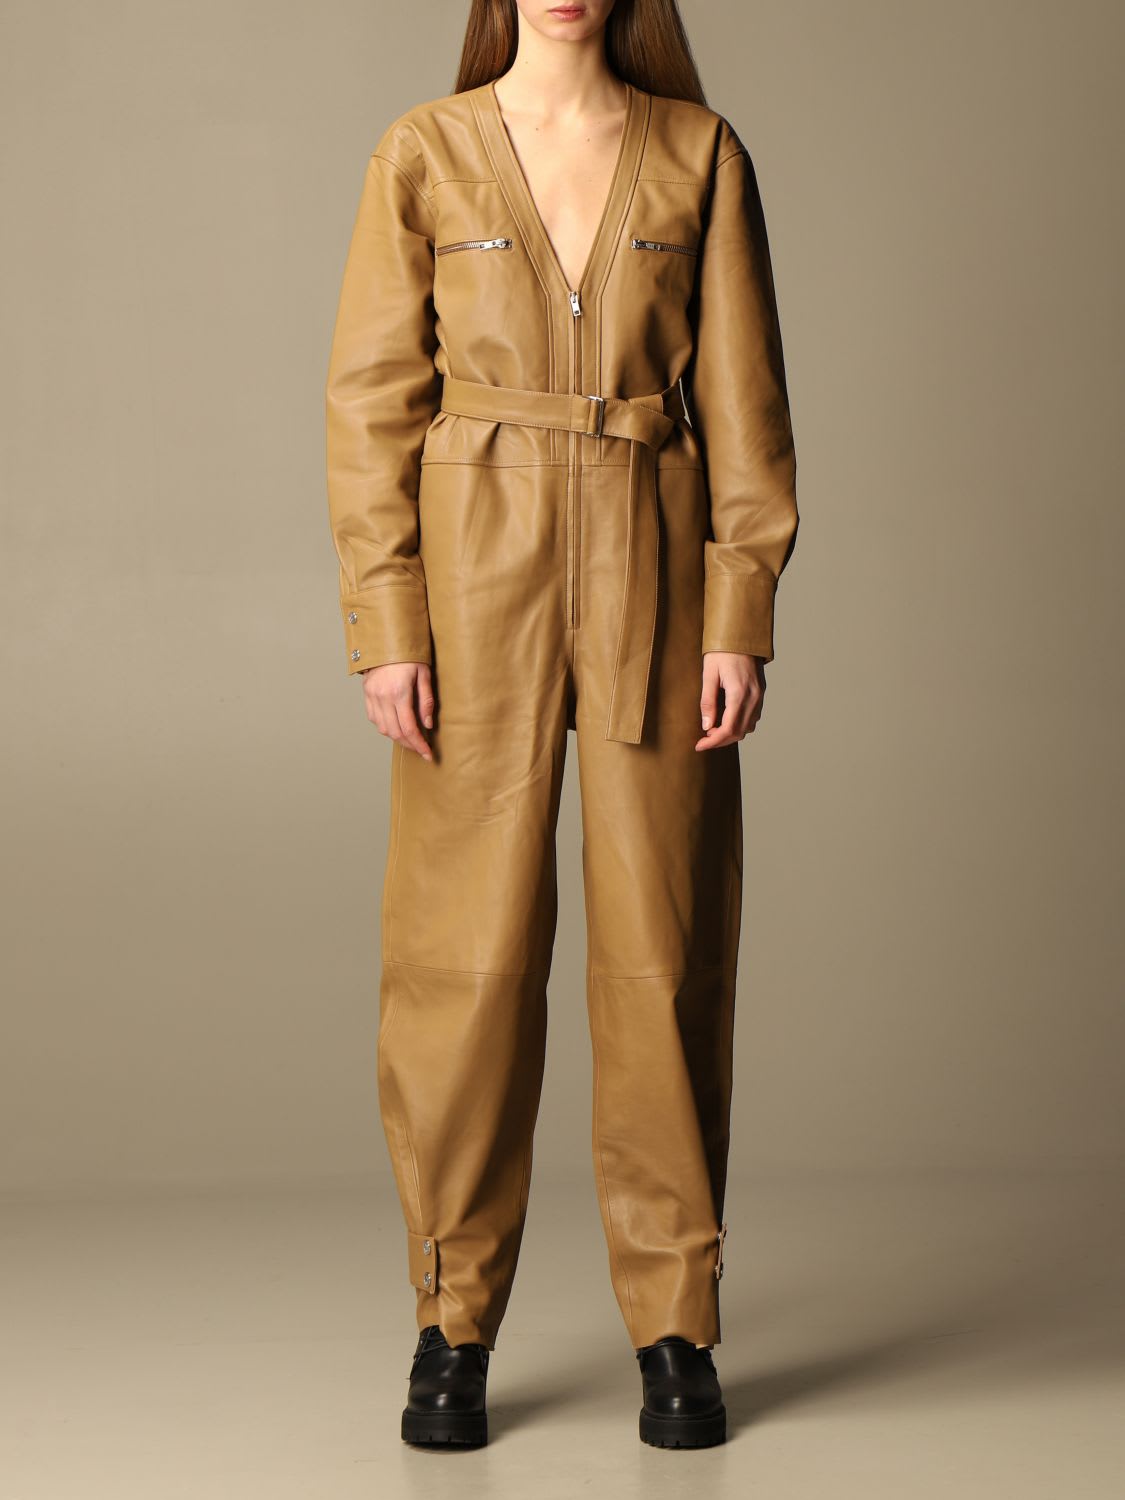 REMAIN Birger Christensen Remain Jumpsuits Remain Suit In Genuine Leather With Belt